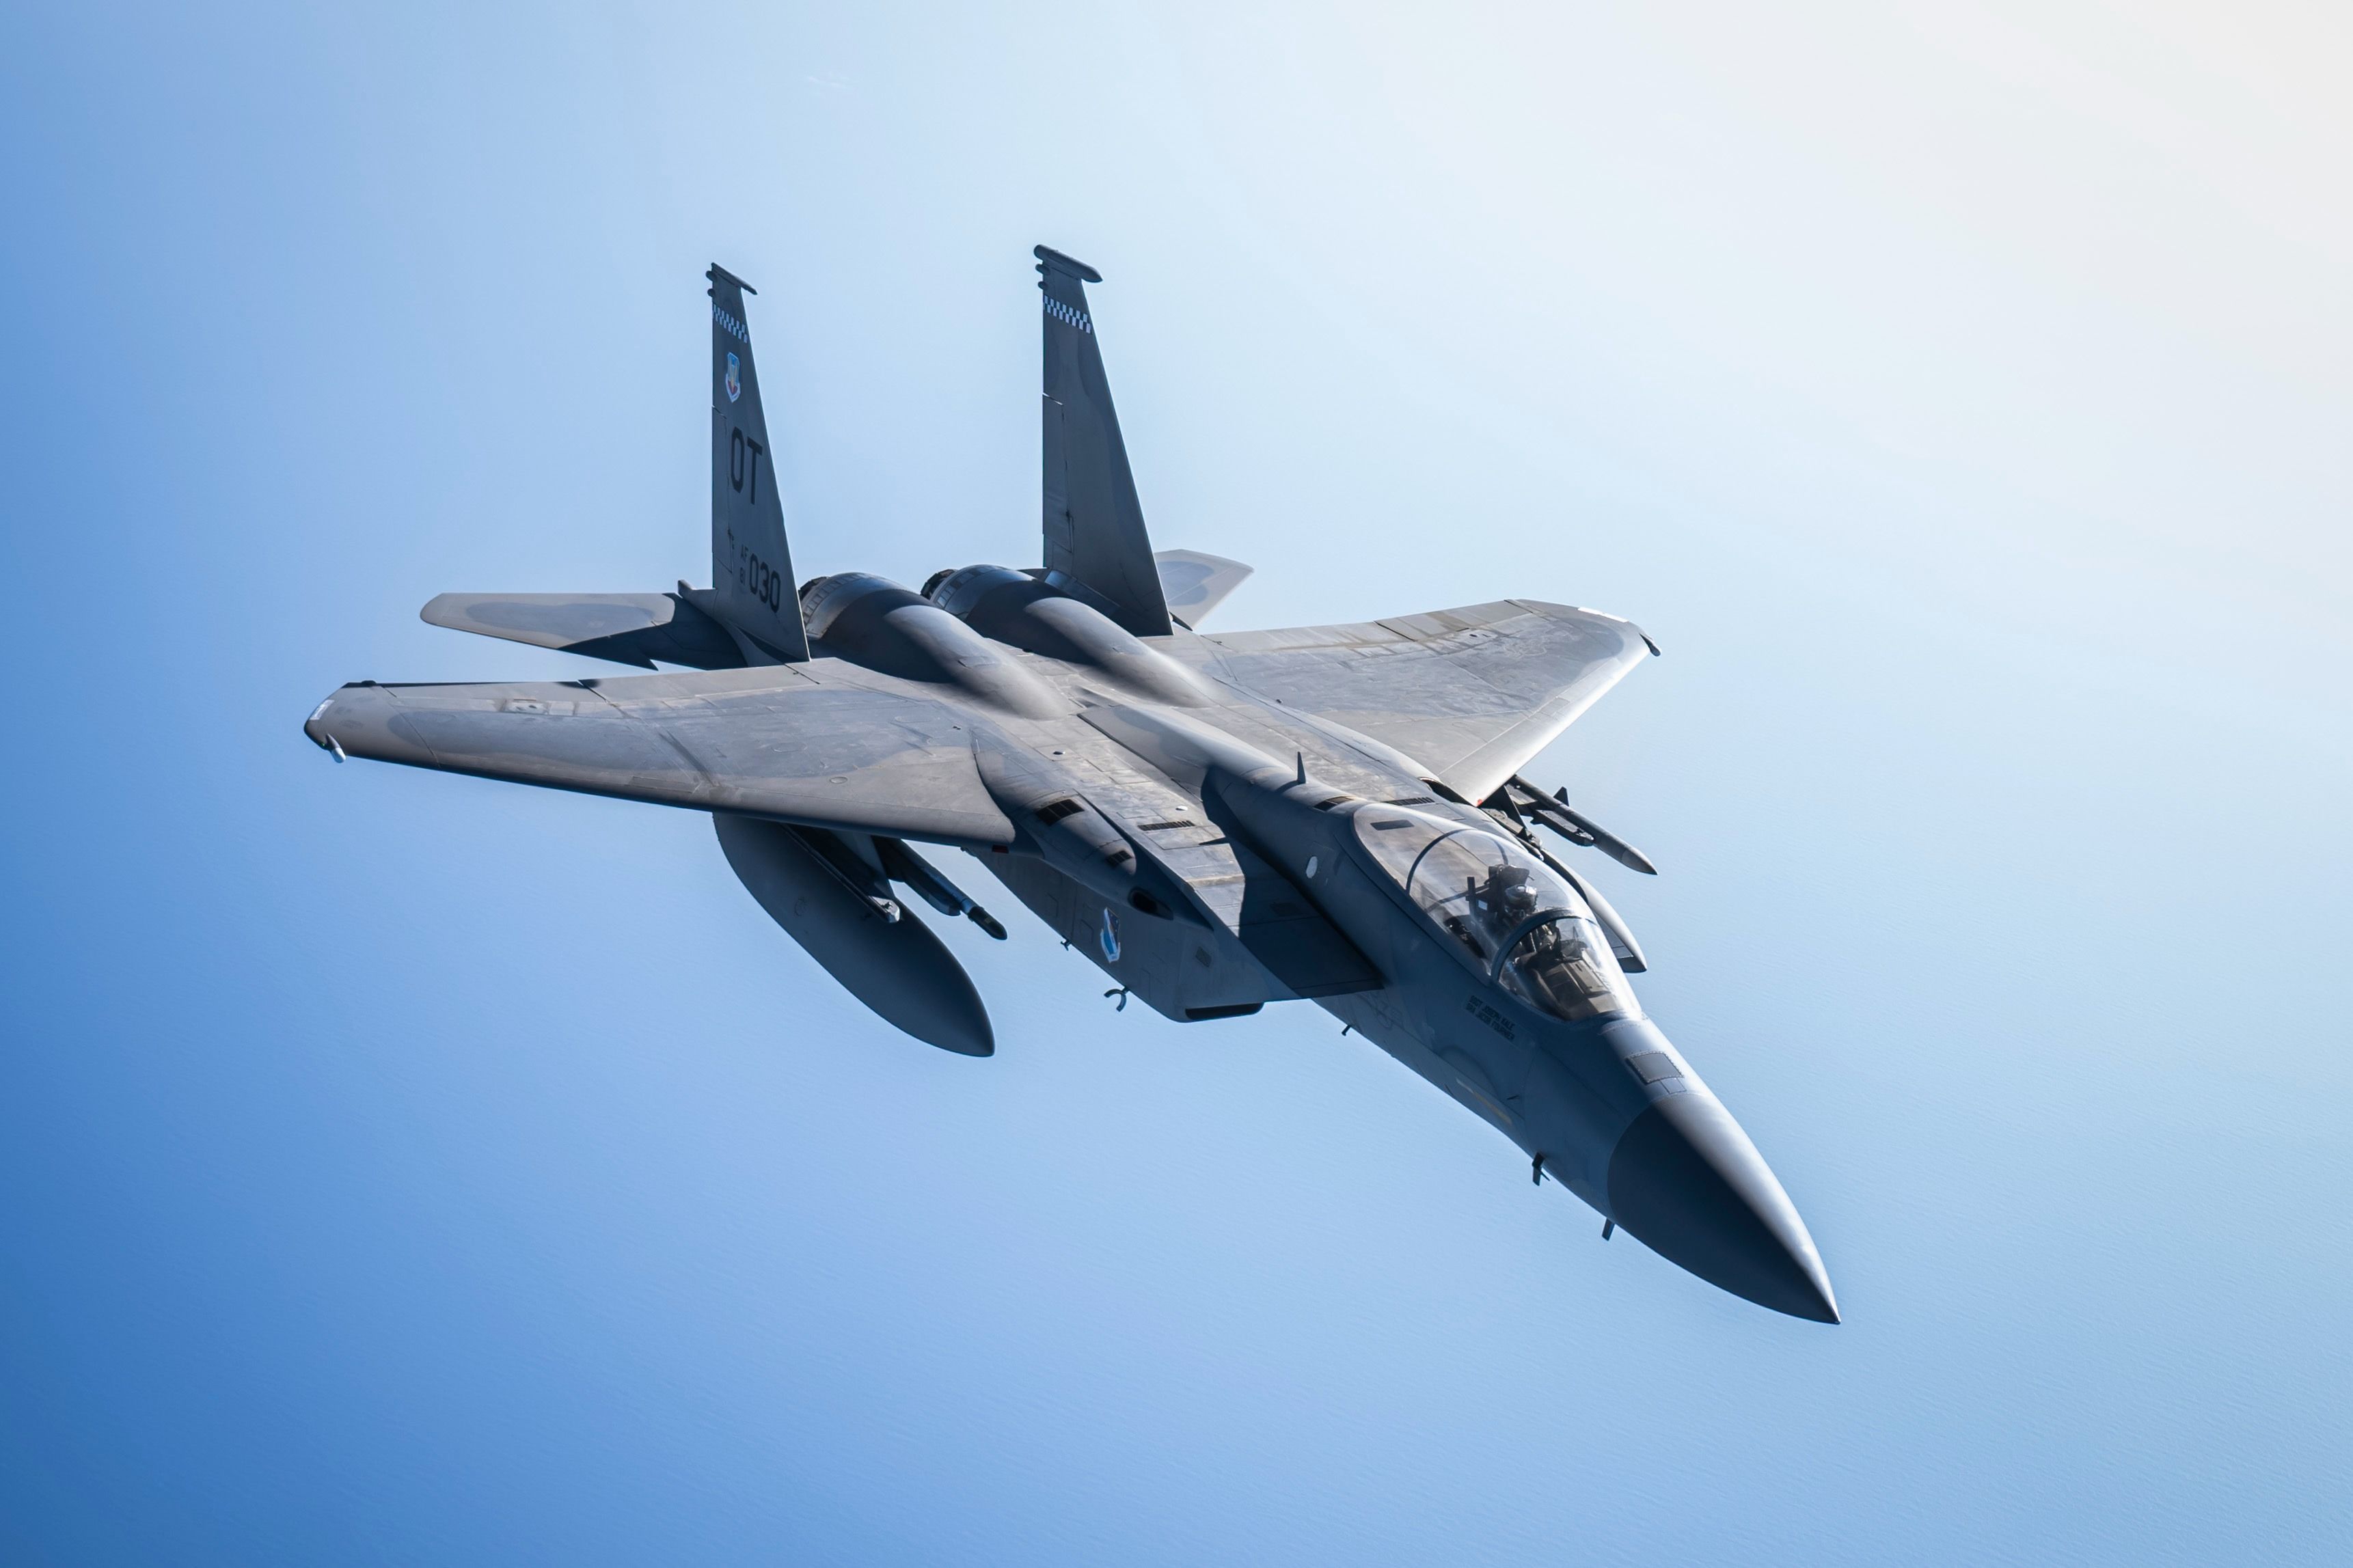 An F-15 Fighter jet flying in the sky.